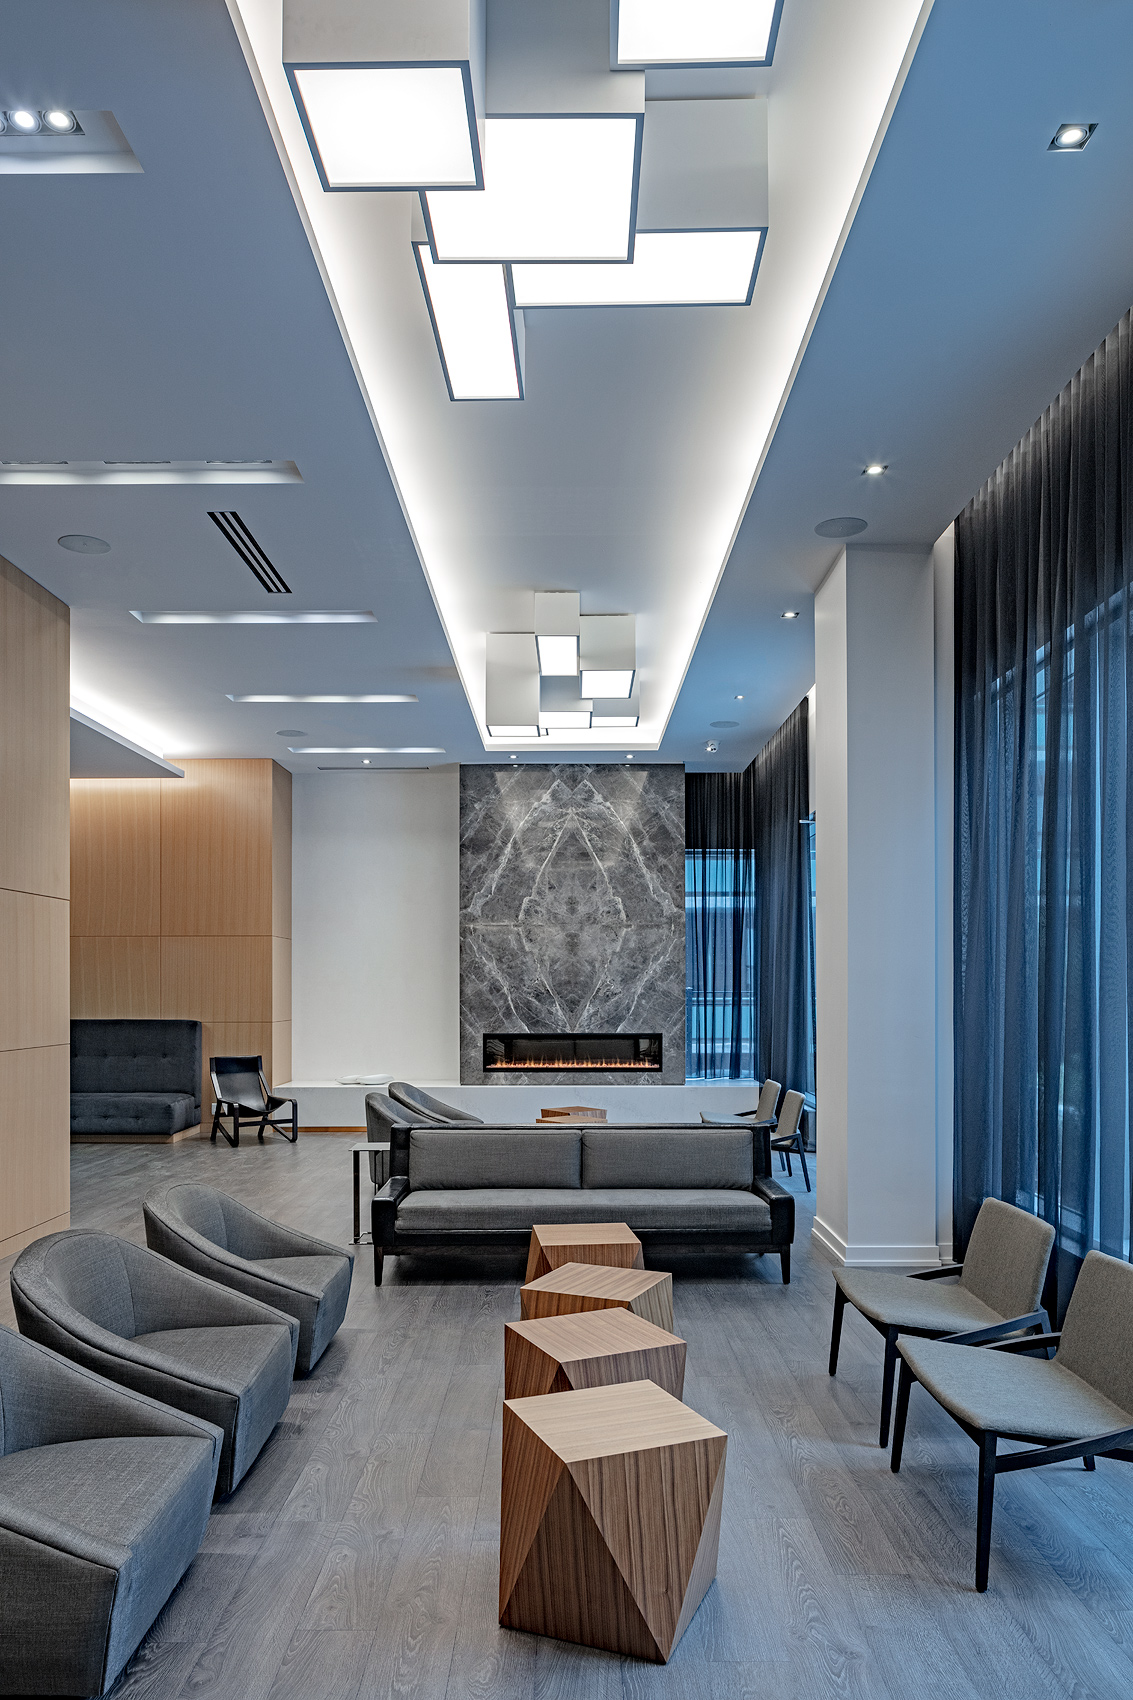 Party room in a condominium, Peter A. Sellar Architectural Photographer